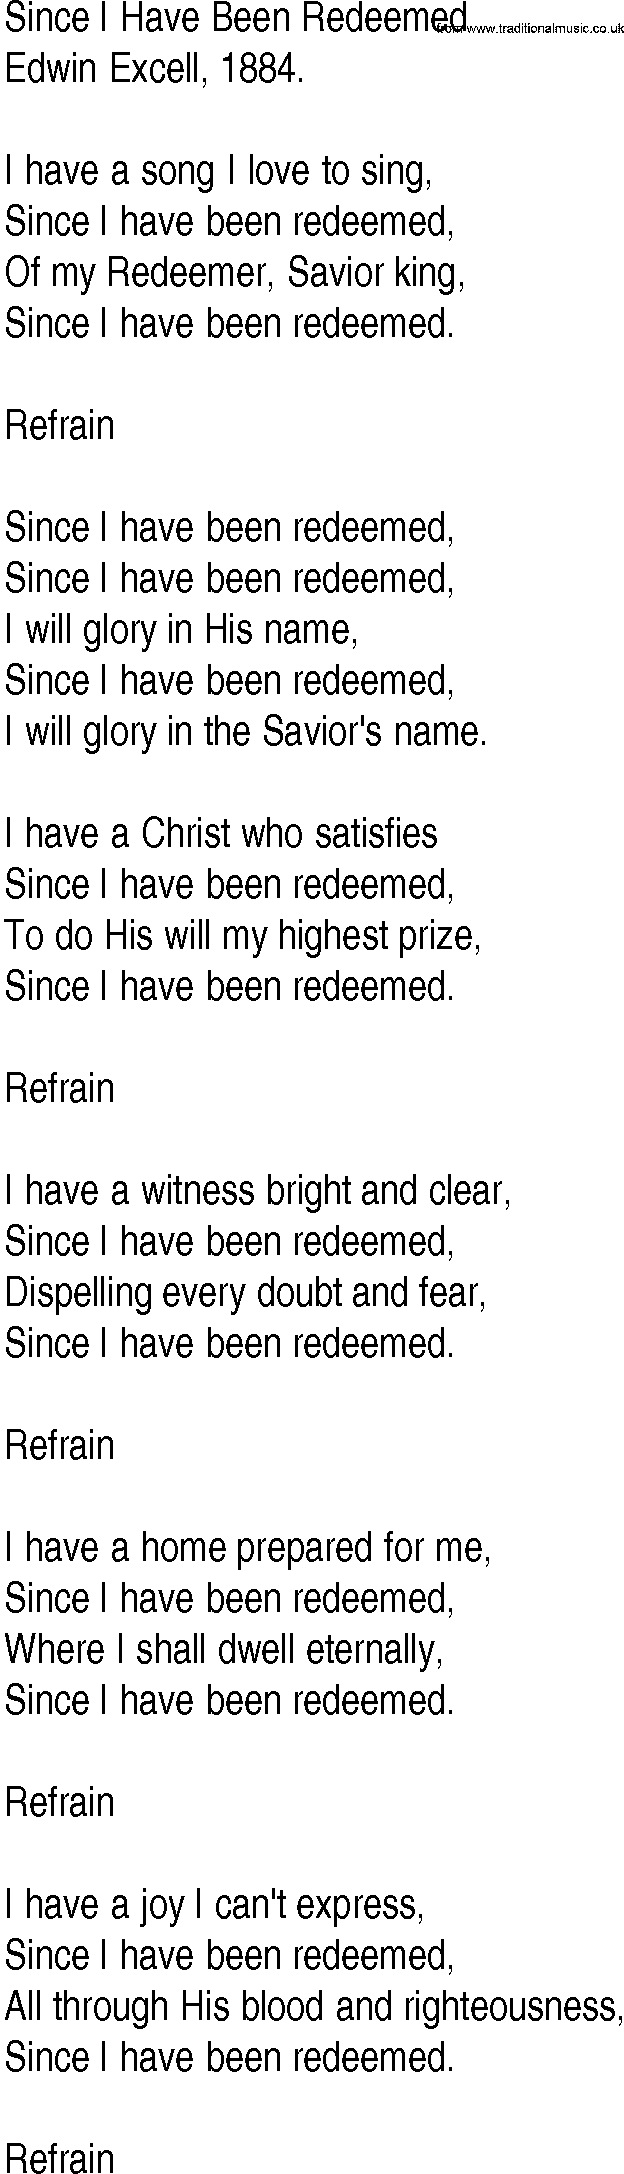 Hymn and Gospel Song: Since I Have Been Redeemed by Edwin Excell lyrics